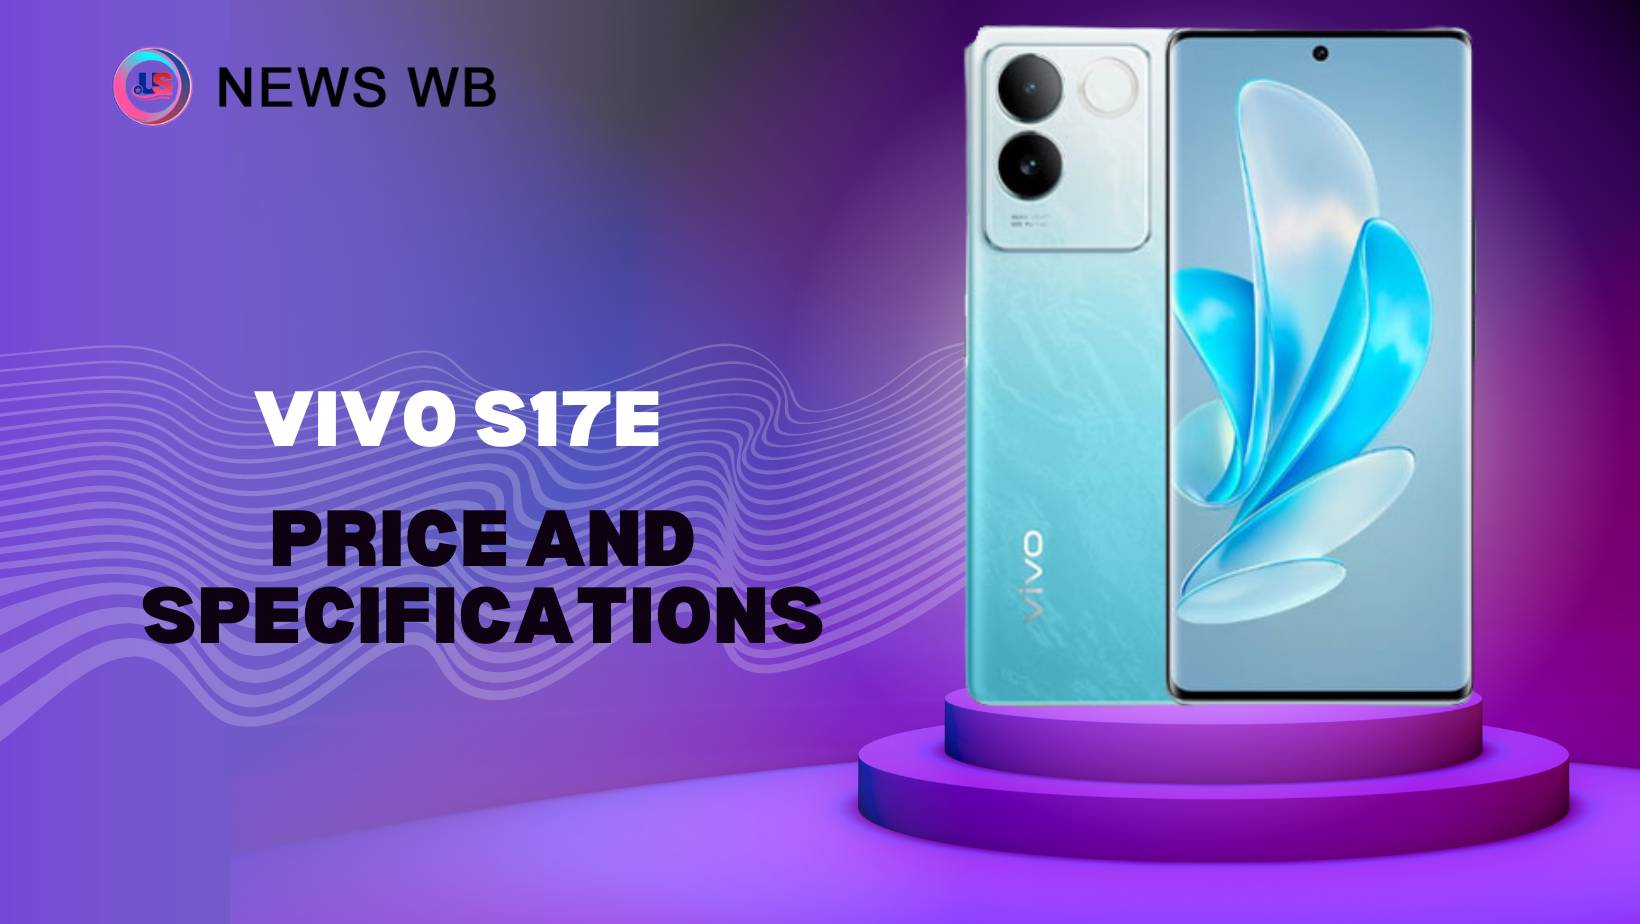 Vivo S17e Price and Specifications